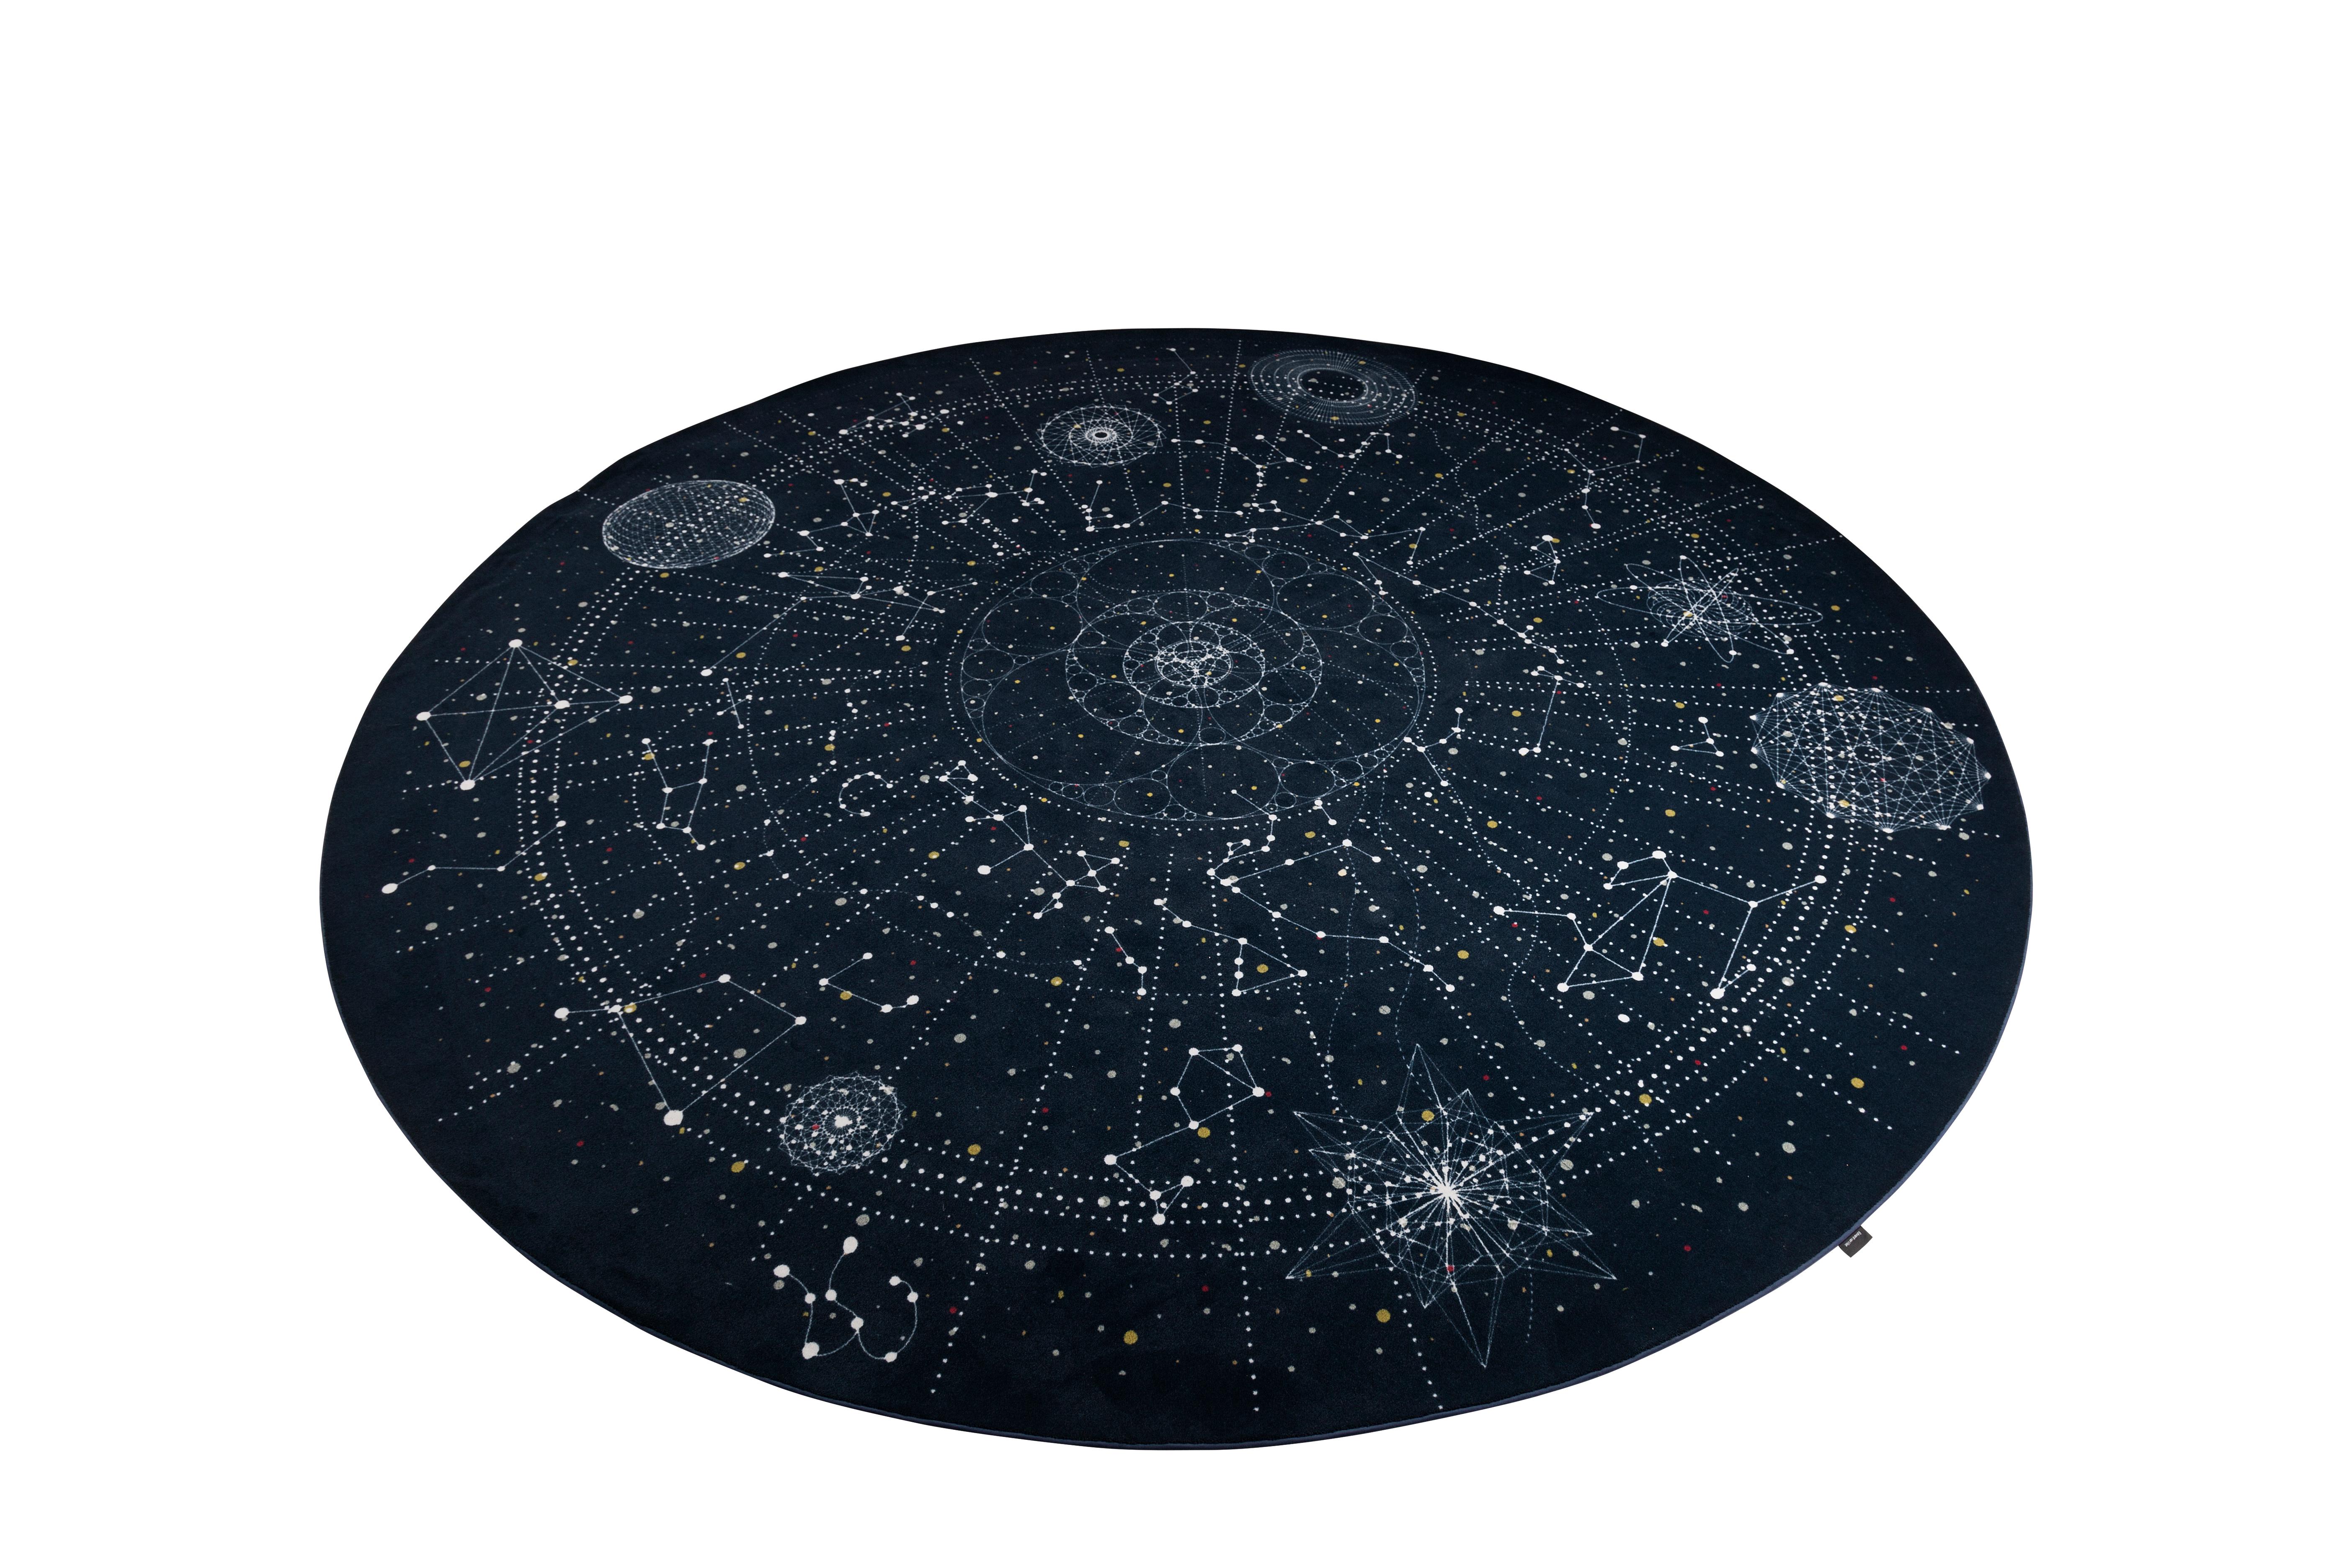 Moooi large Celestial rug in low pile polyamide by Edward van Vliet

After his graduation from the Design Academy Eindhoven in 1989 – Edward belongs to the famous generation of Dutch designers who have been causing international sensation for many